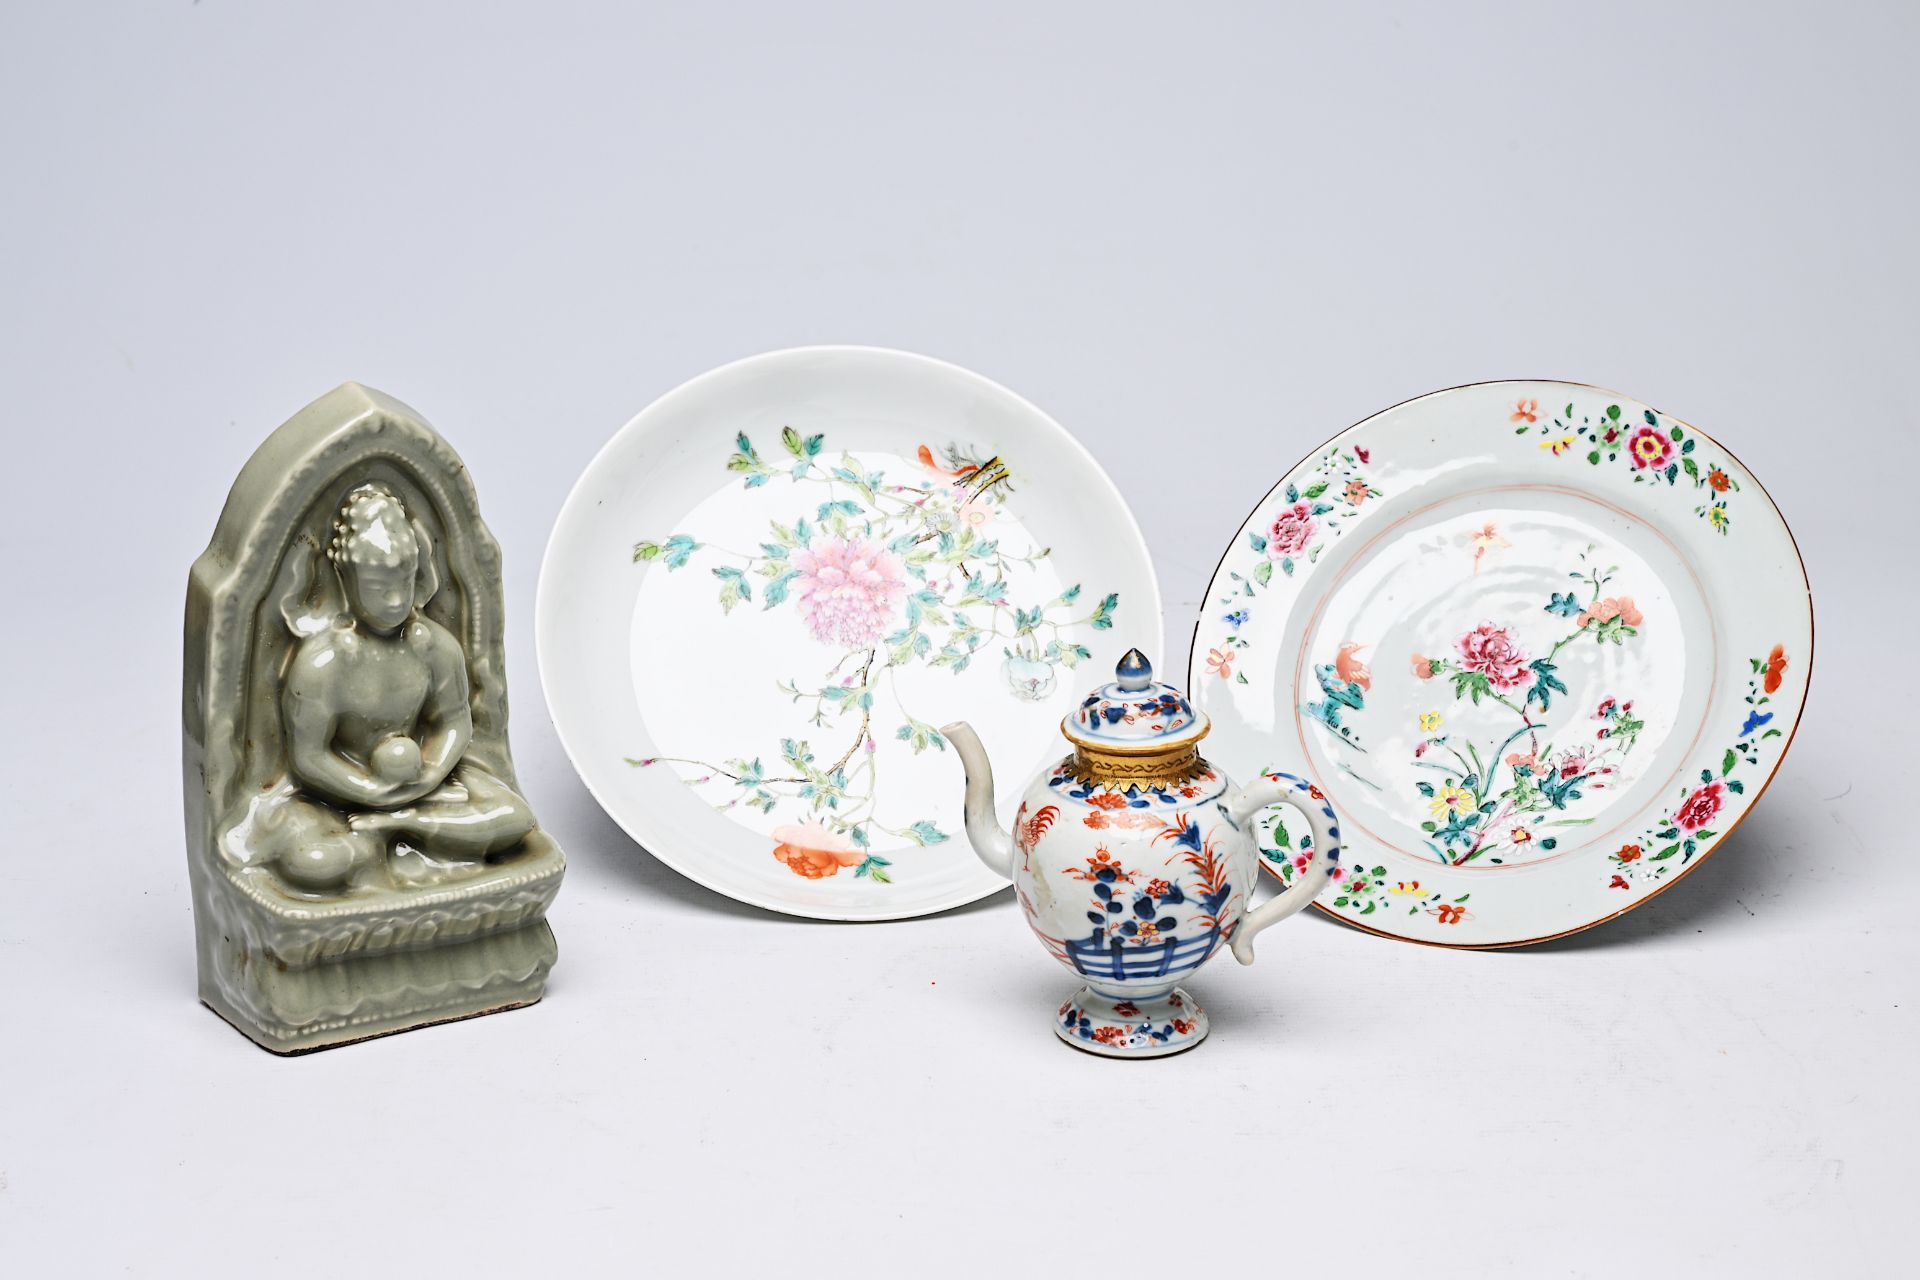 A Chinese Imari style teapot, two famille rose plates with floral design and a celadon 'Buddha' figu - Image 6 of 6